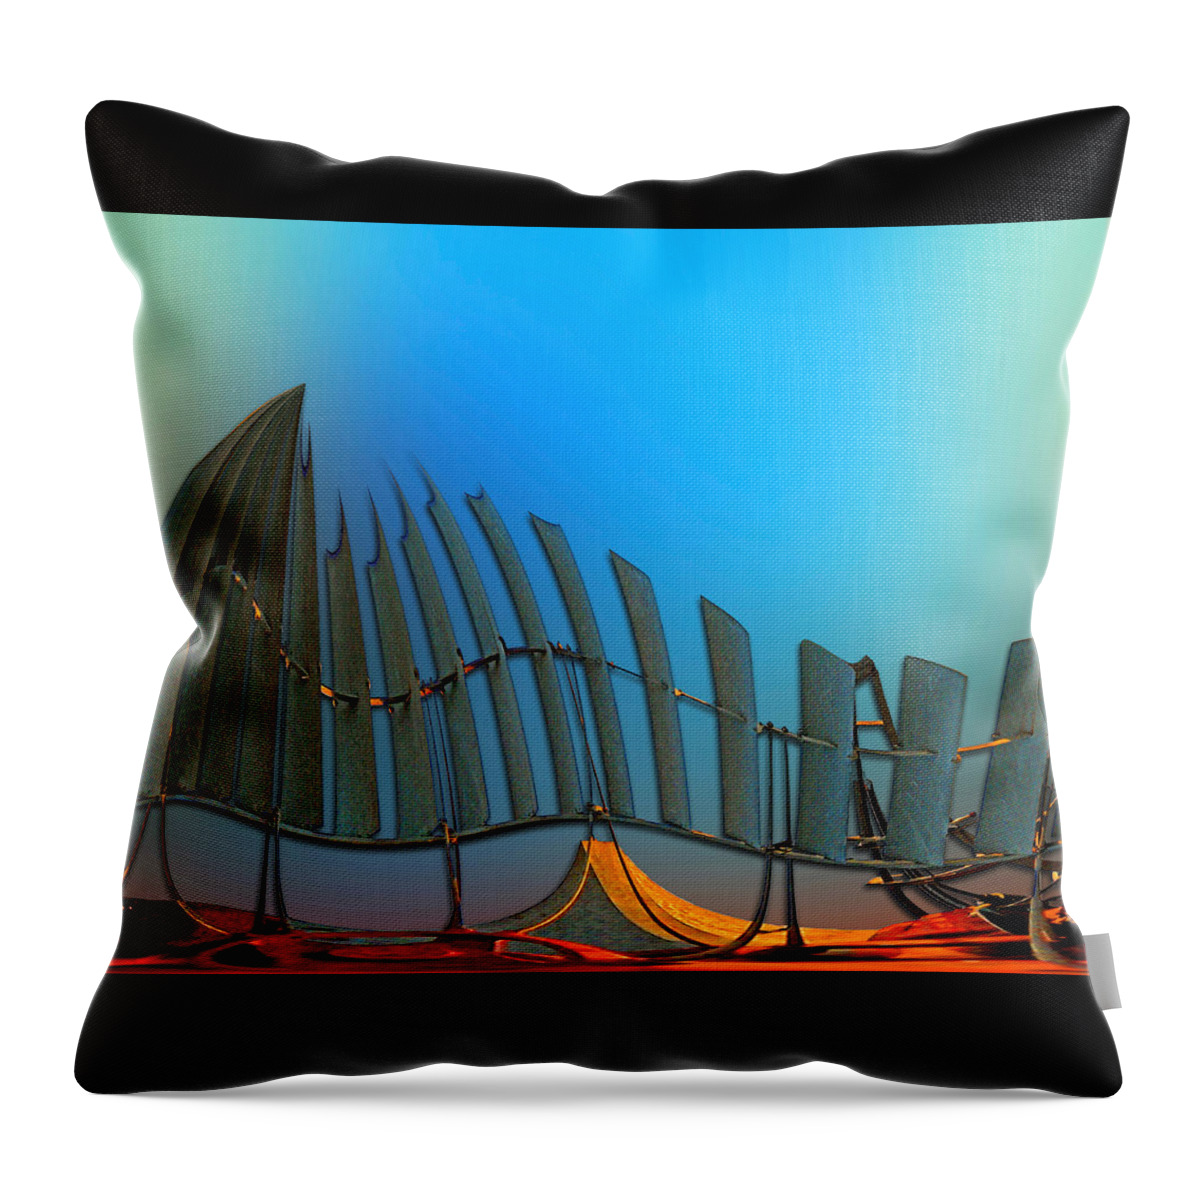 Abstract Throw Pillow featuring the digital art Da Vinci's Outpost by Wendy J St Christopher